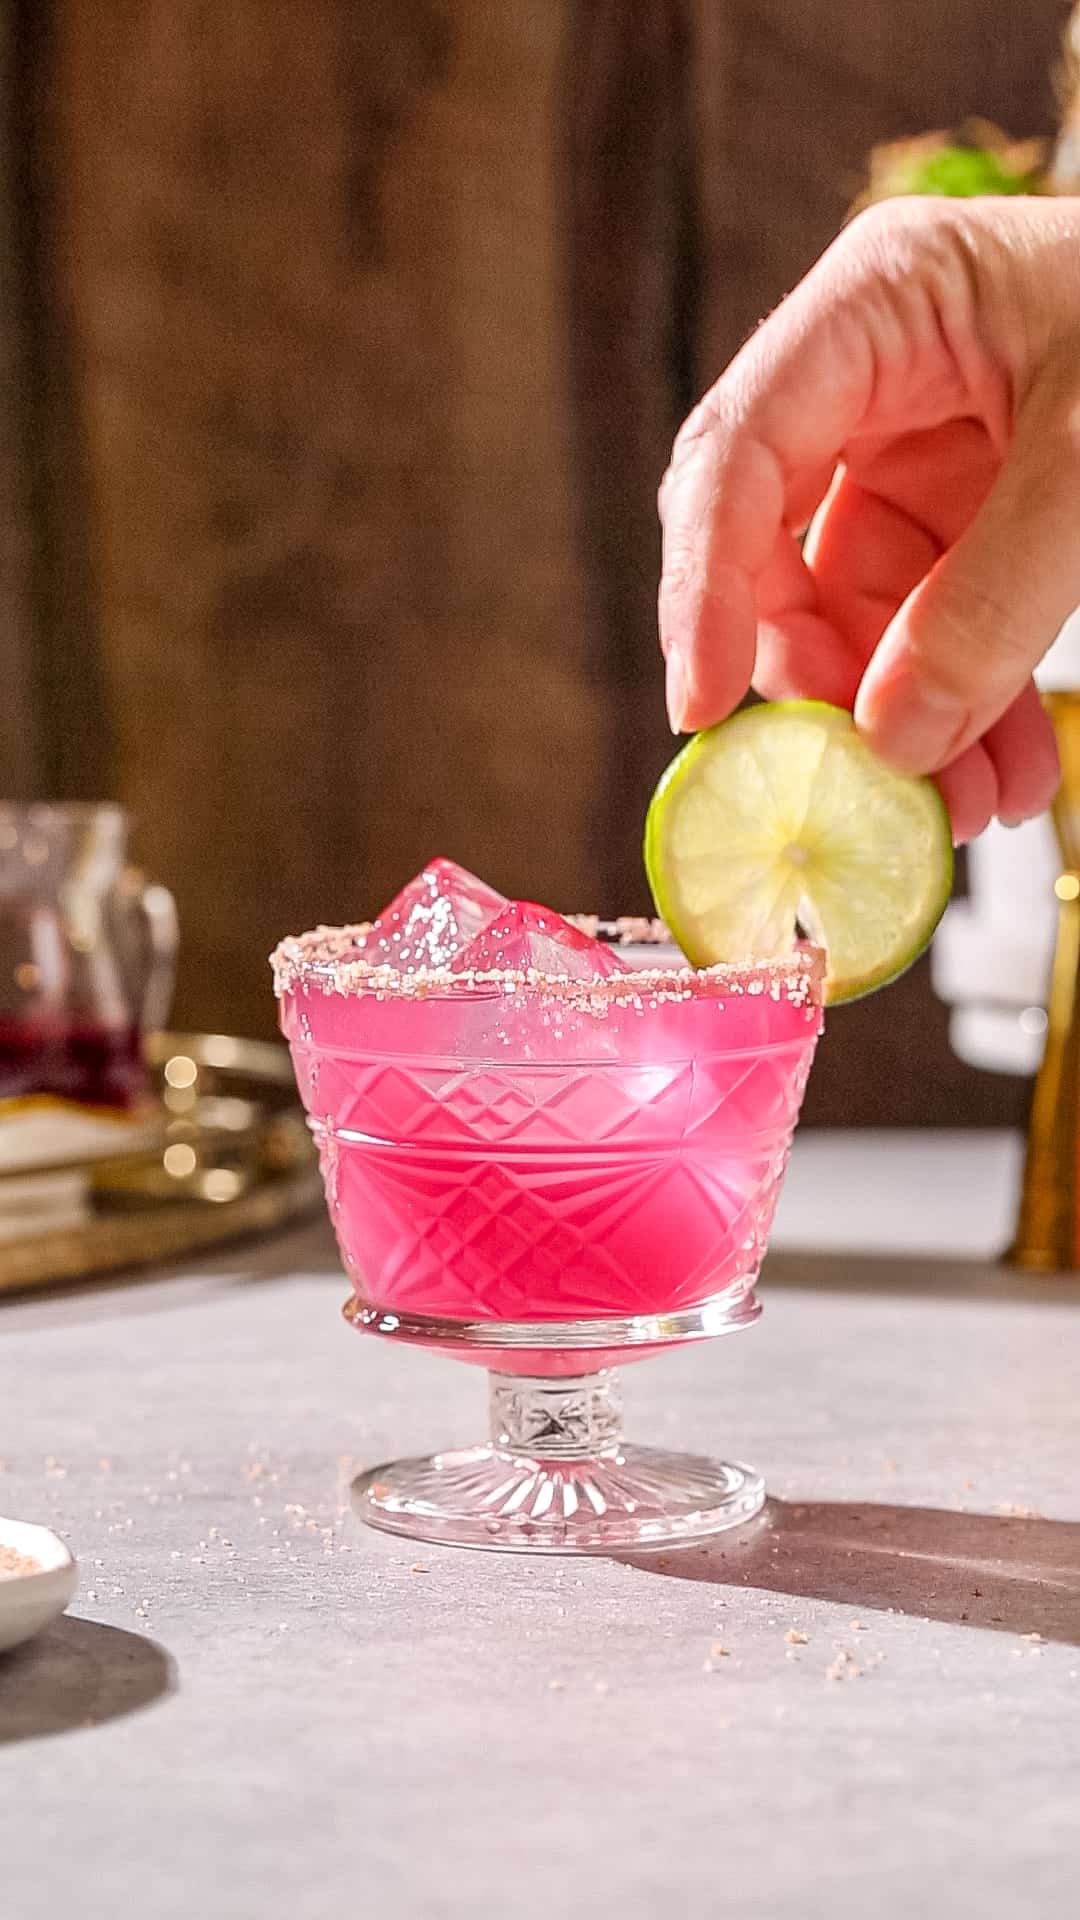 Hand adding a lime wheel garnish to a prickly pear Margarita cocktail.